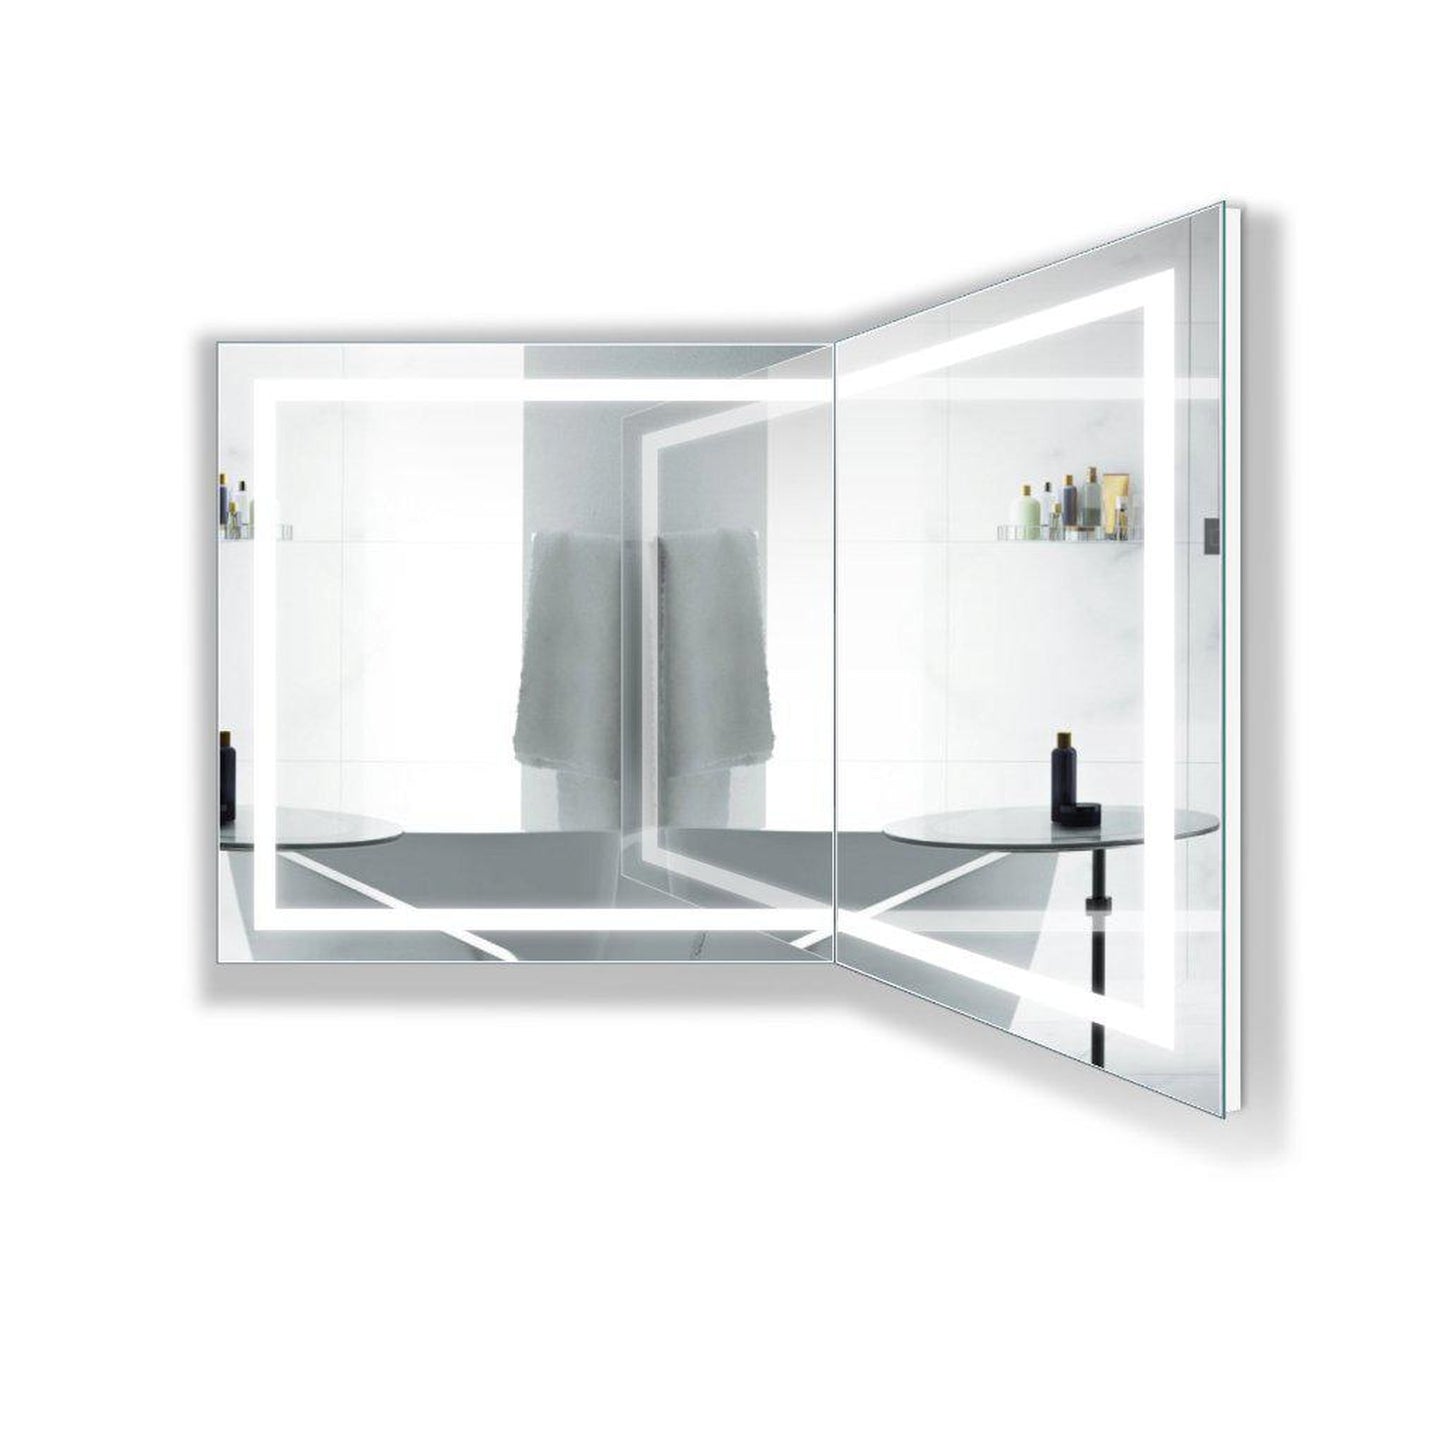 Krugg Reflections Mod 72" x 36" 36D 5000K Rectangular Modular Corner Wall-Mounted Silver-Backed LED Bathroom Vanity Mirror With Built-in Defogger and Dimmer